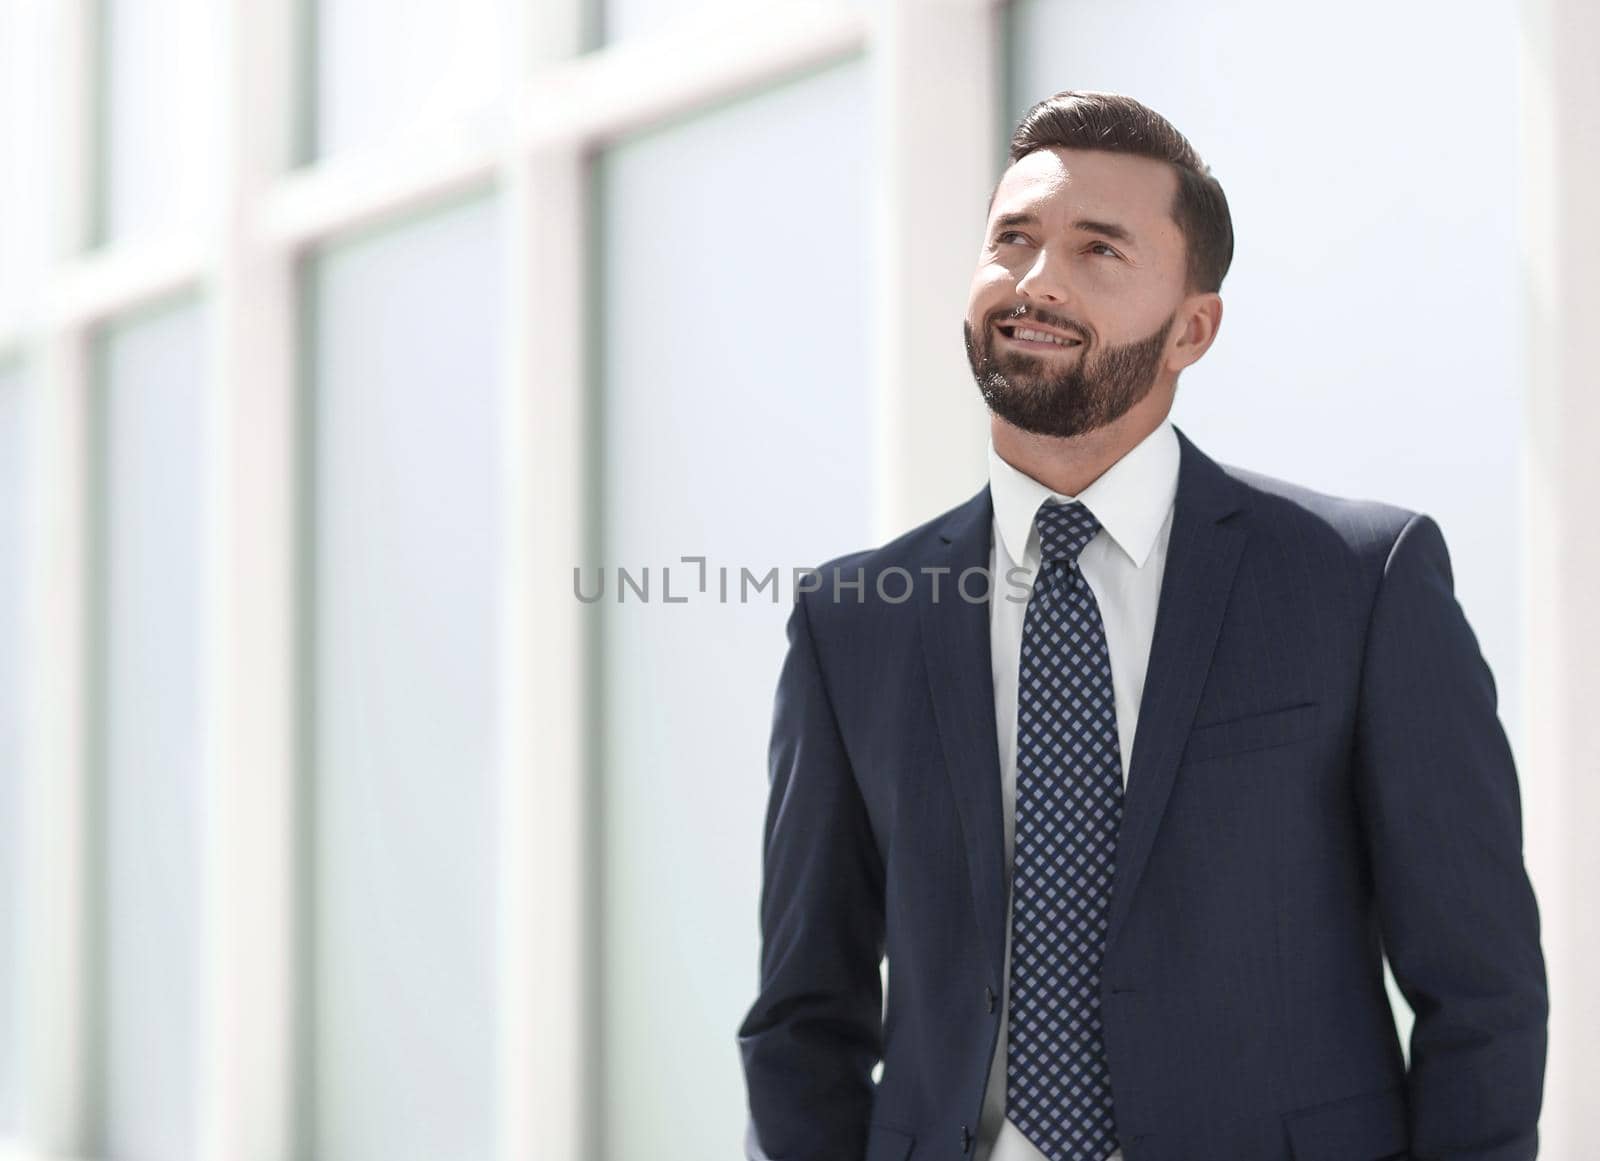 dreaming businessman standing in a bright office.photo with copy space